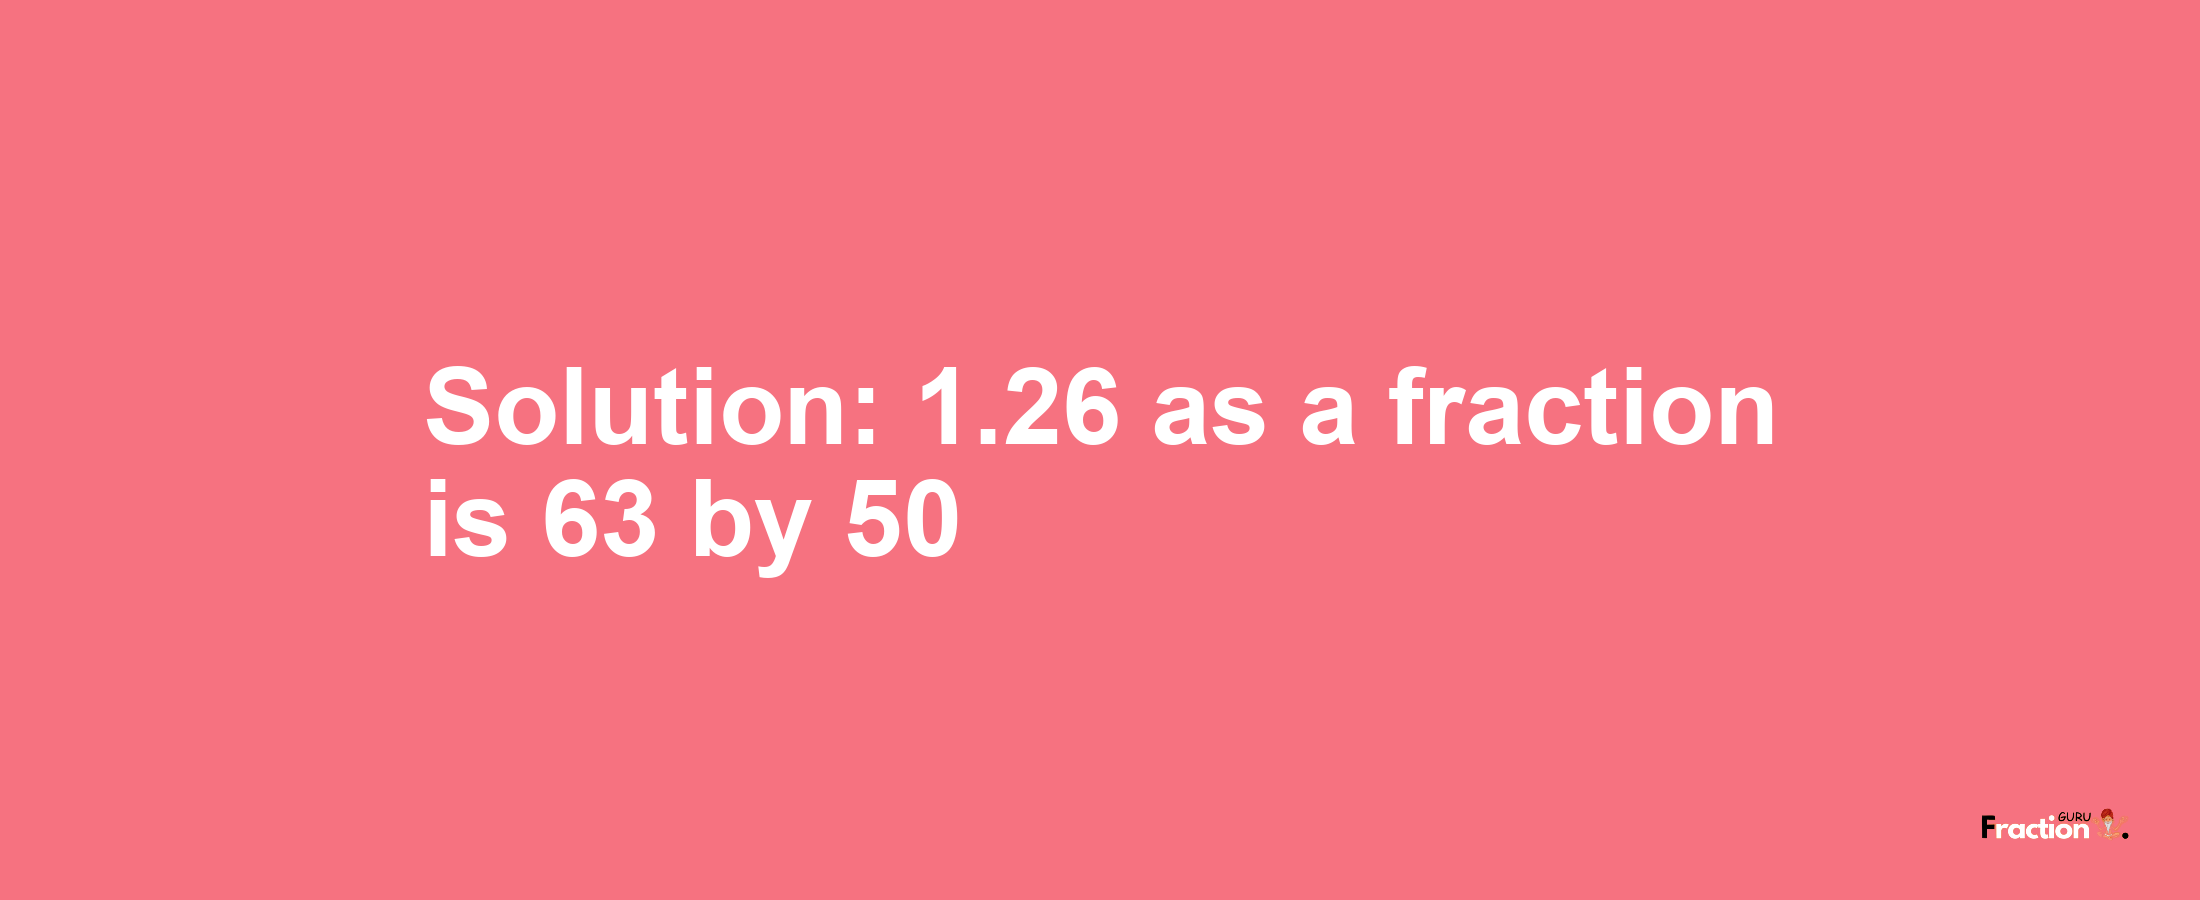 Solution:1.26 as a fraction is 63/50